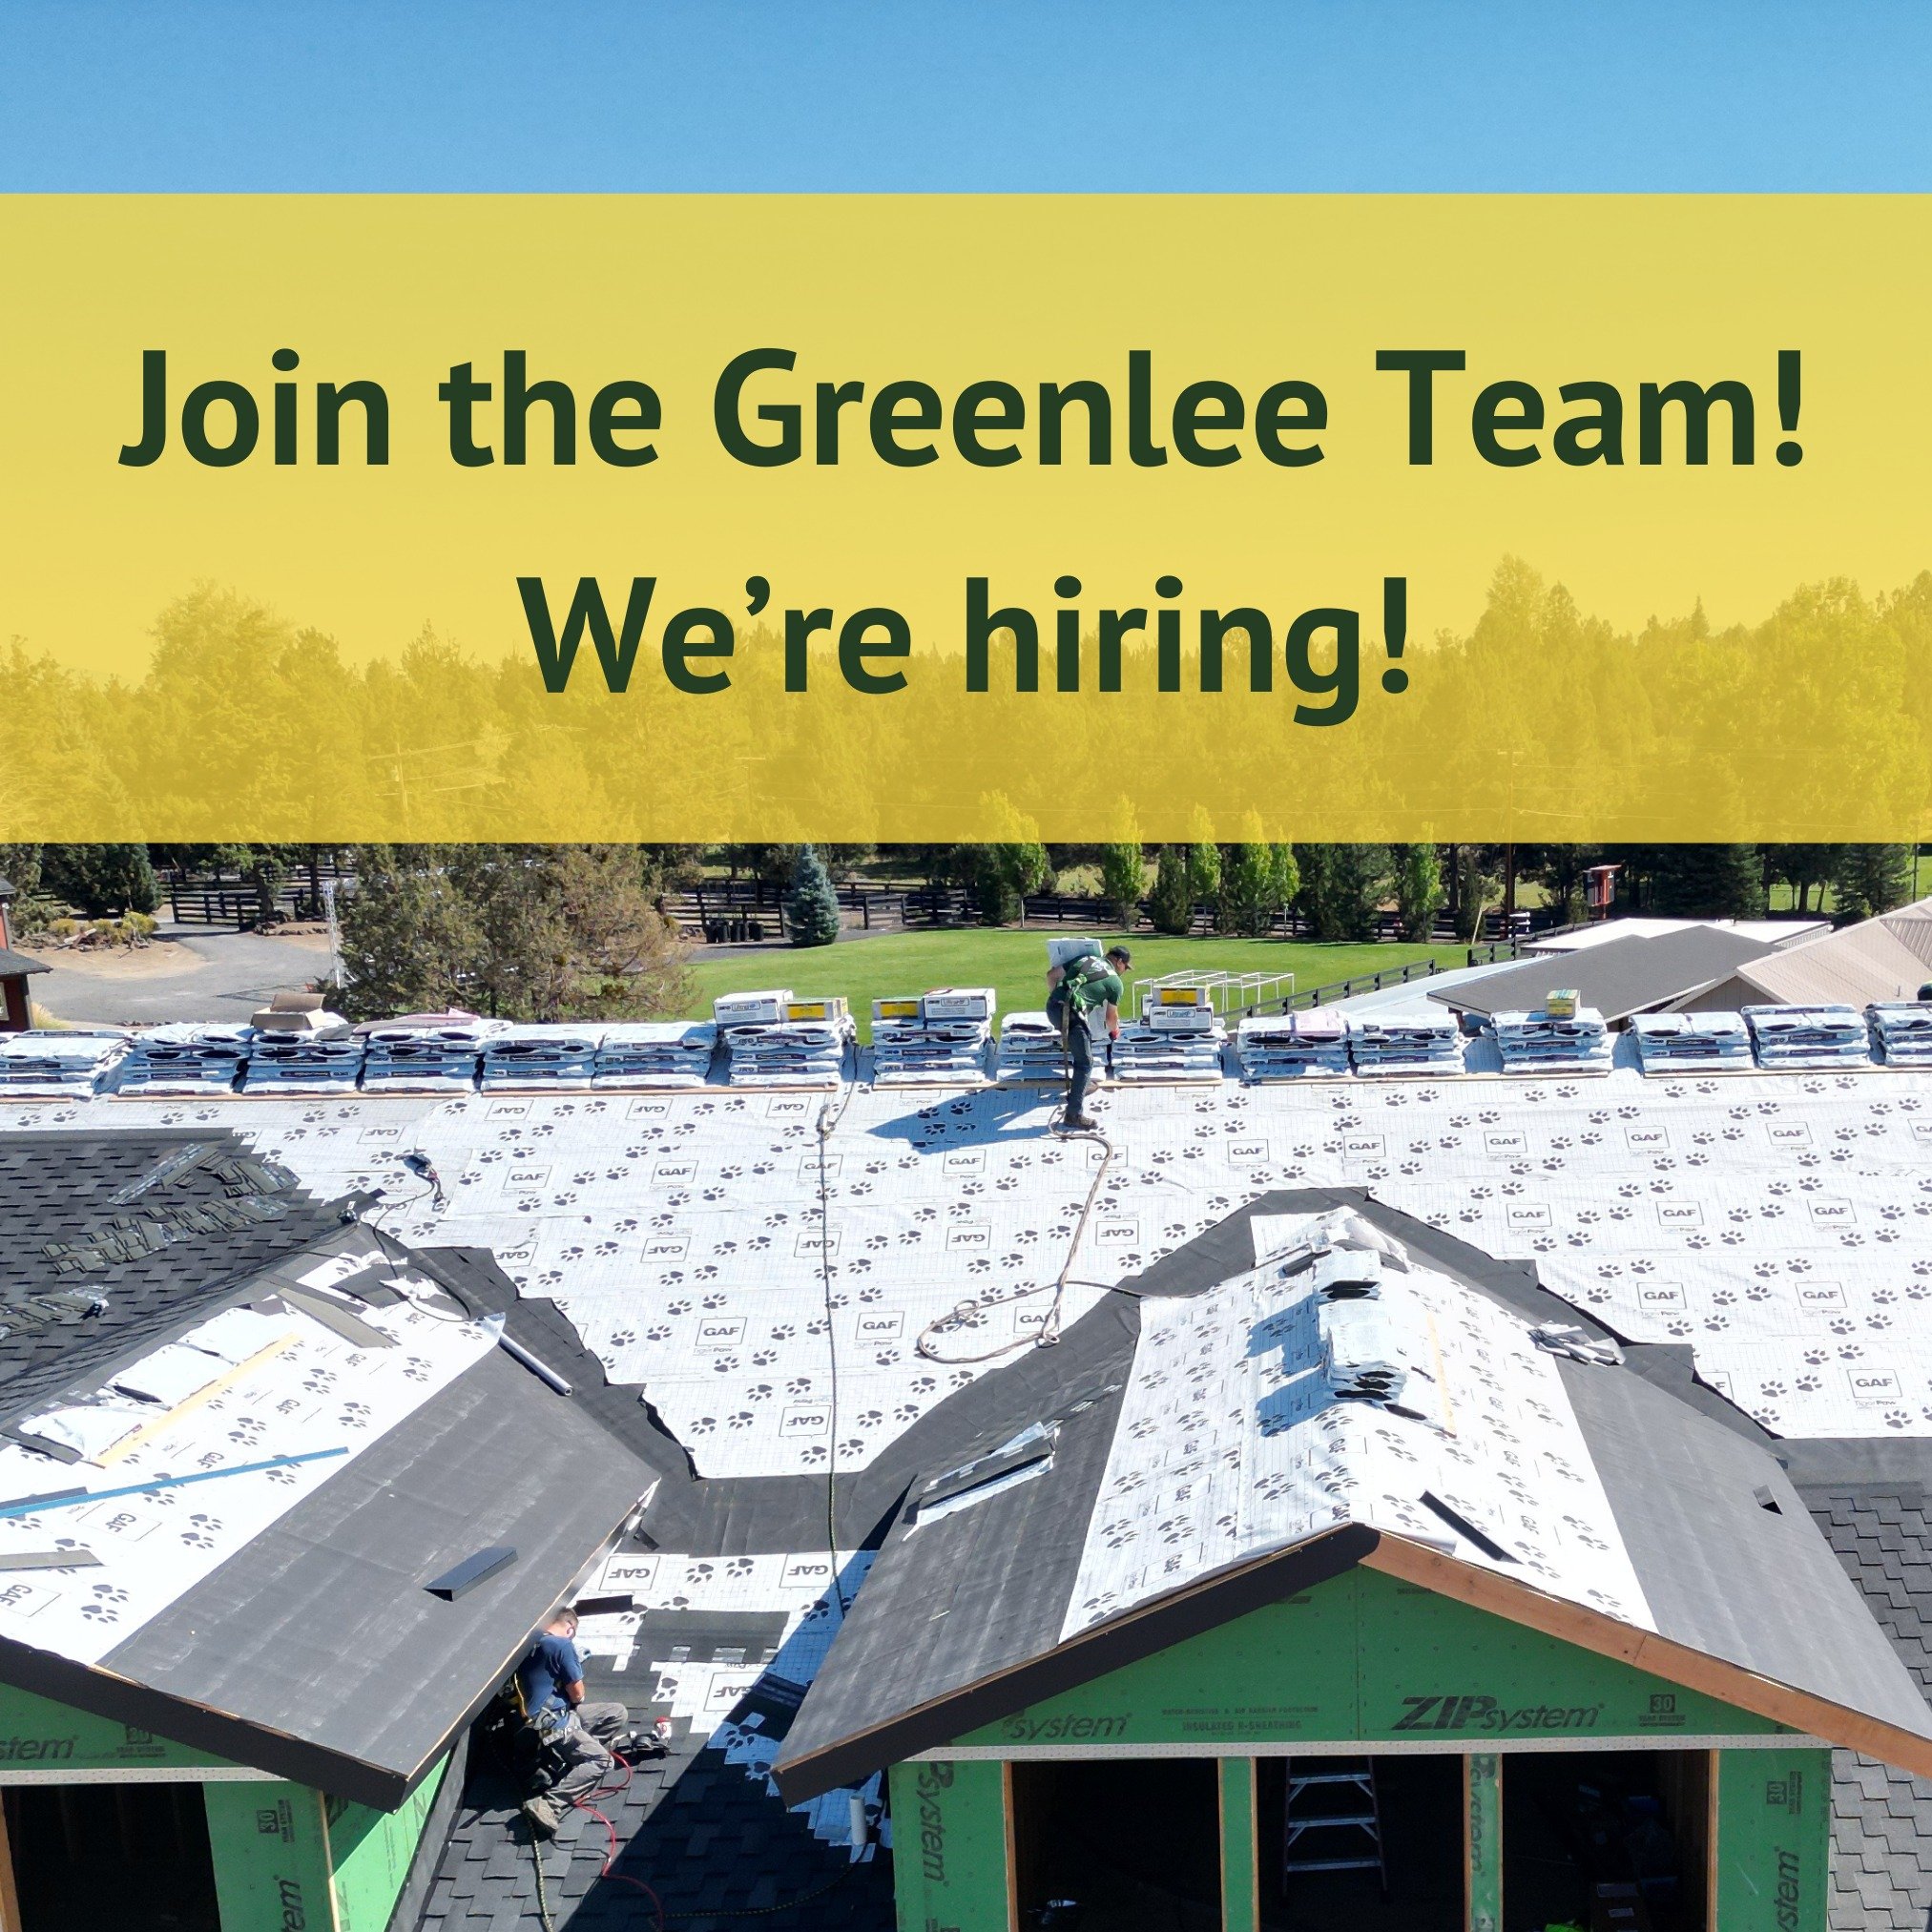 We're hiring roofers and tear off laborers! Apply today!

 https://www.greenleeroofing.com/join-our-team